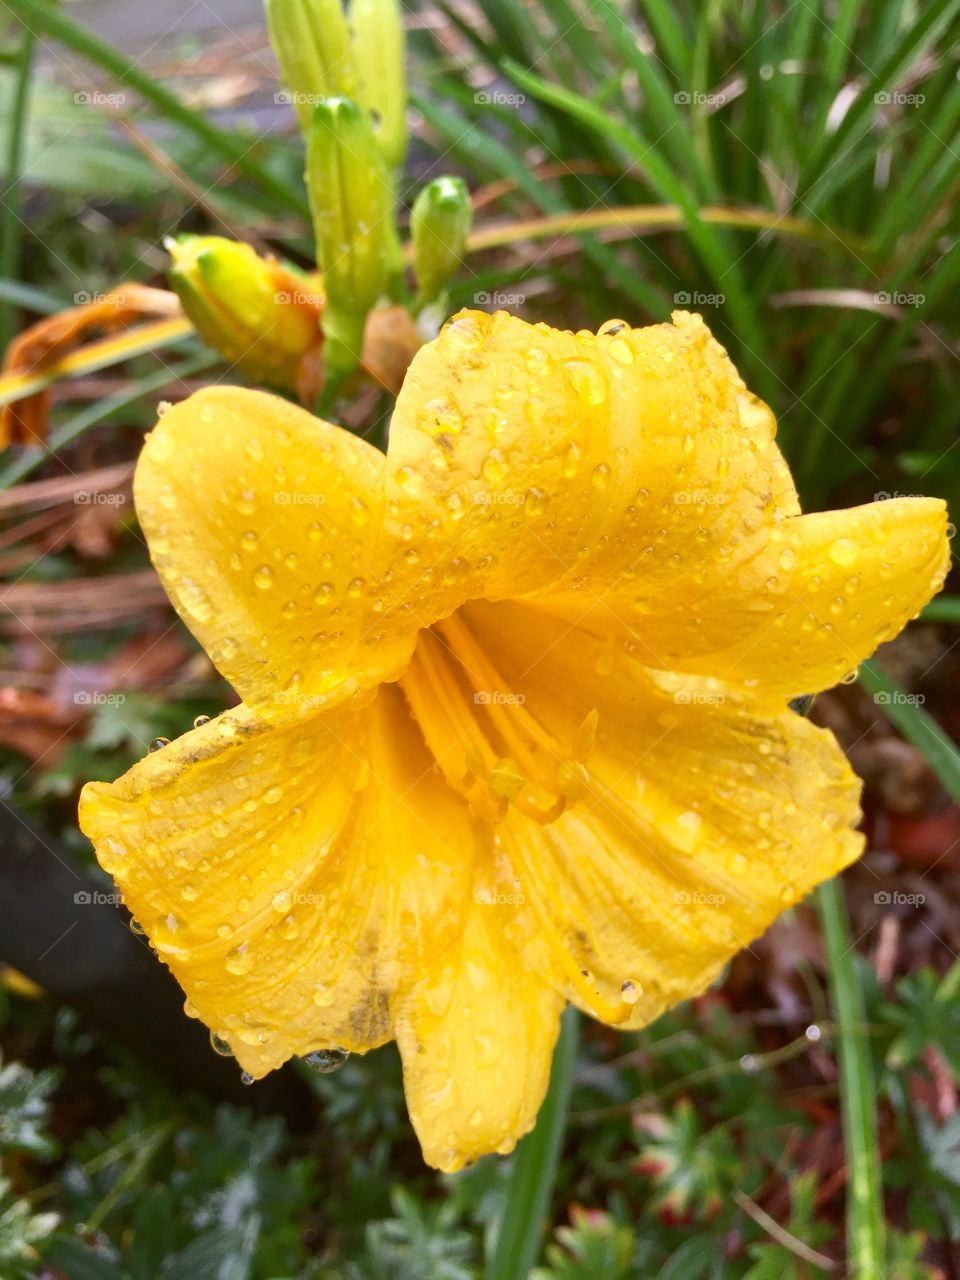 Flowers after the rain 